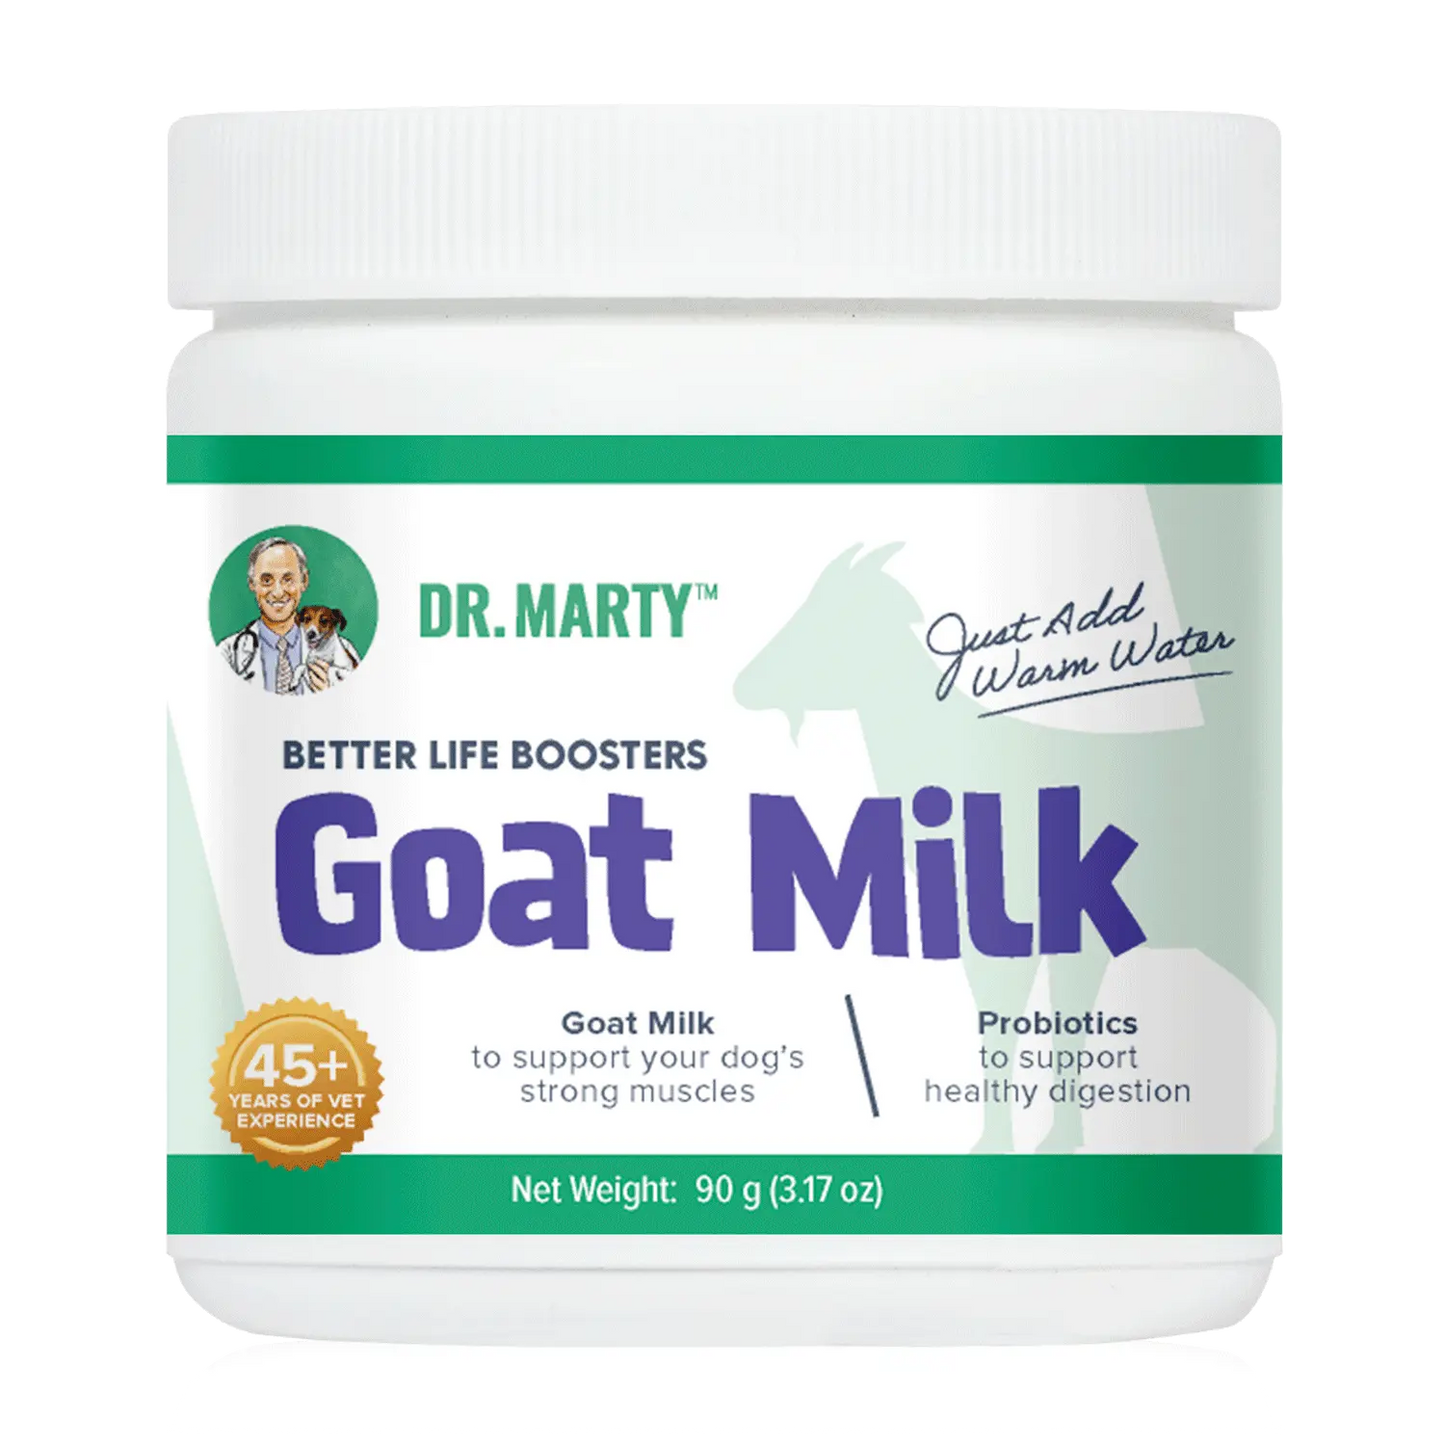 Dr. Marty Goat Milk Better Life Boosters Powdered Supplement for Dogs 3.17oz Dr. Marty